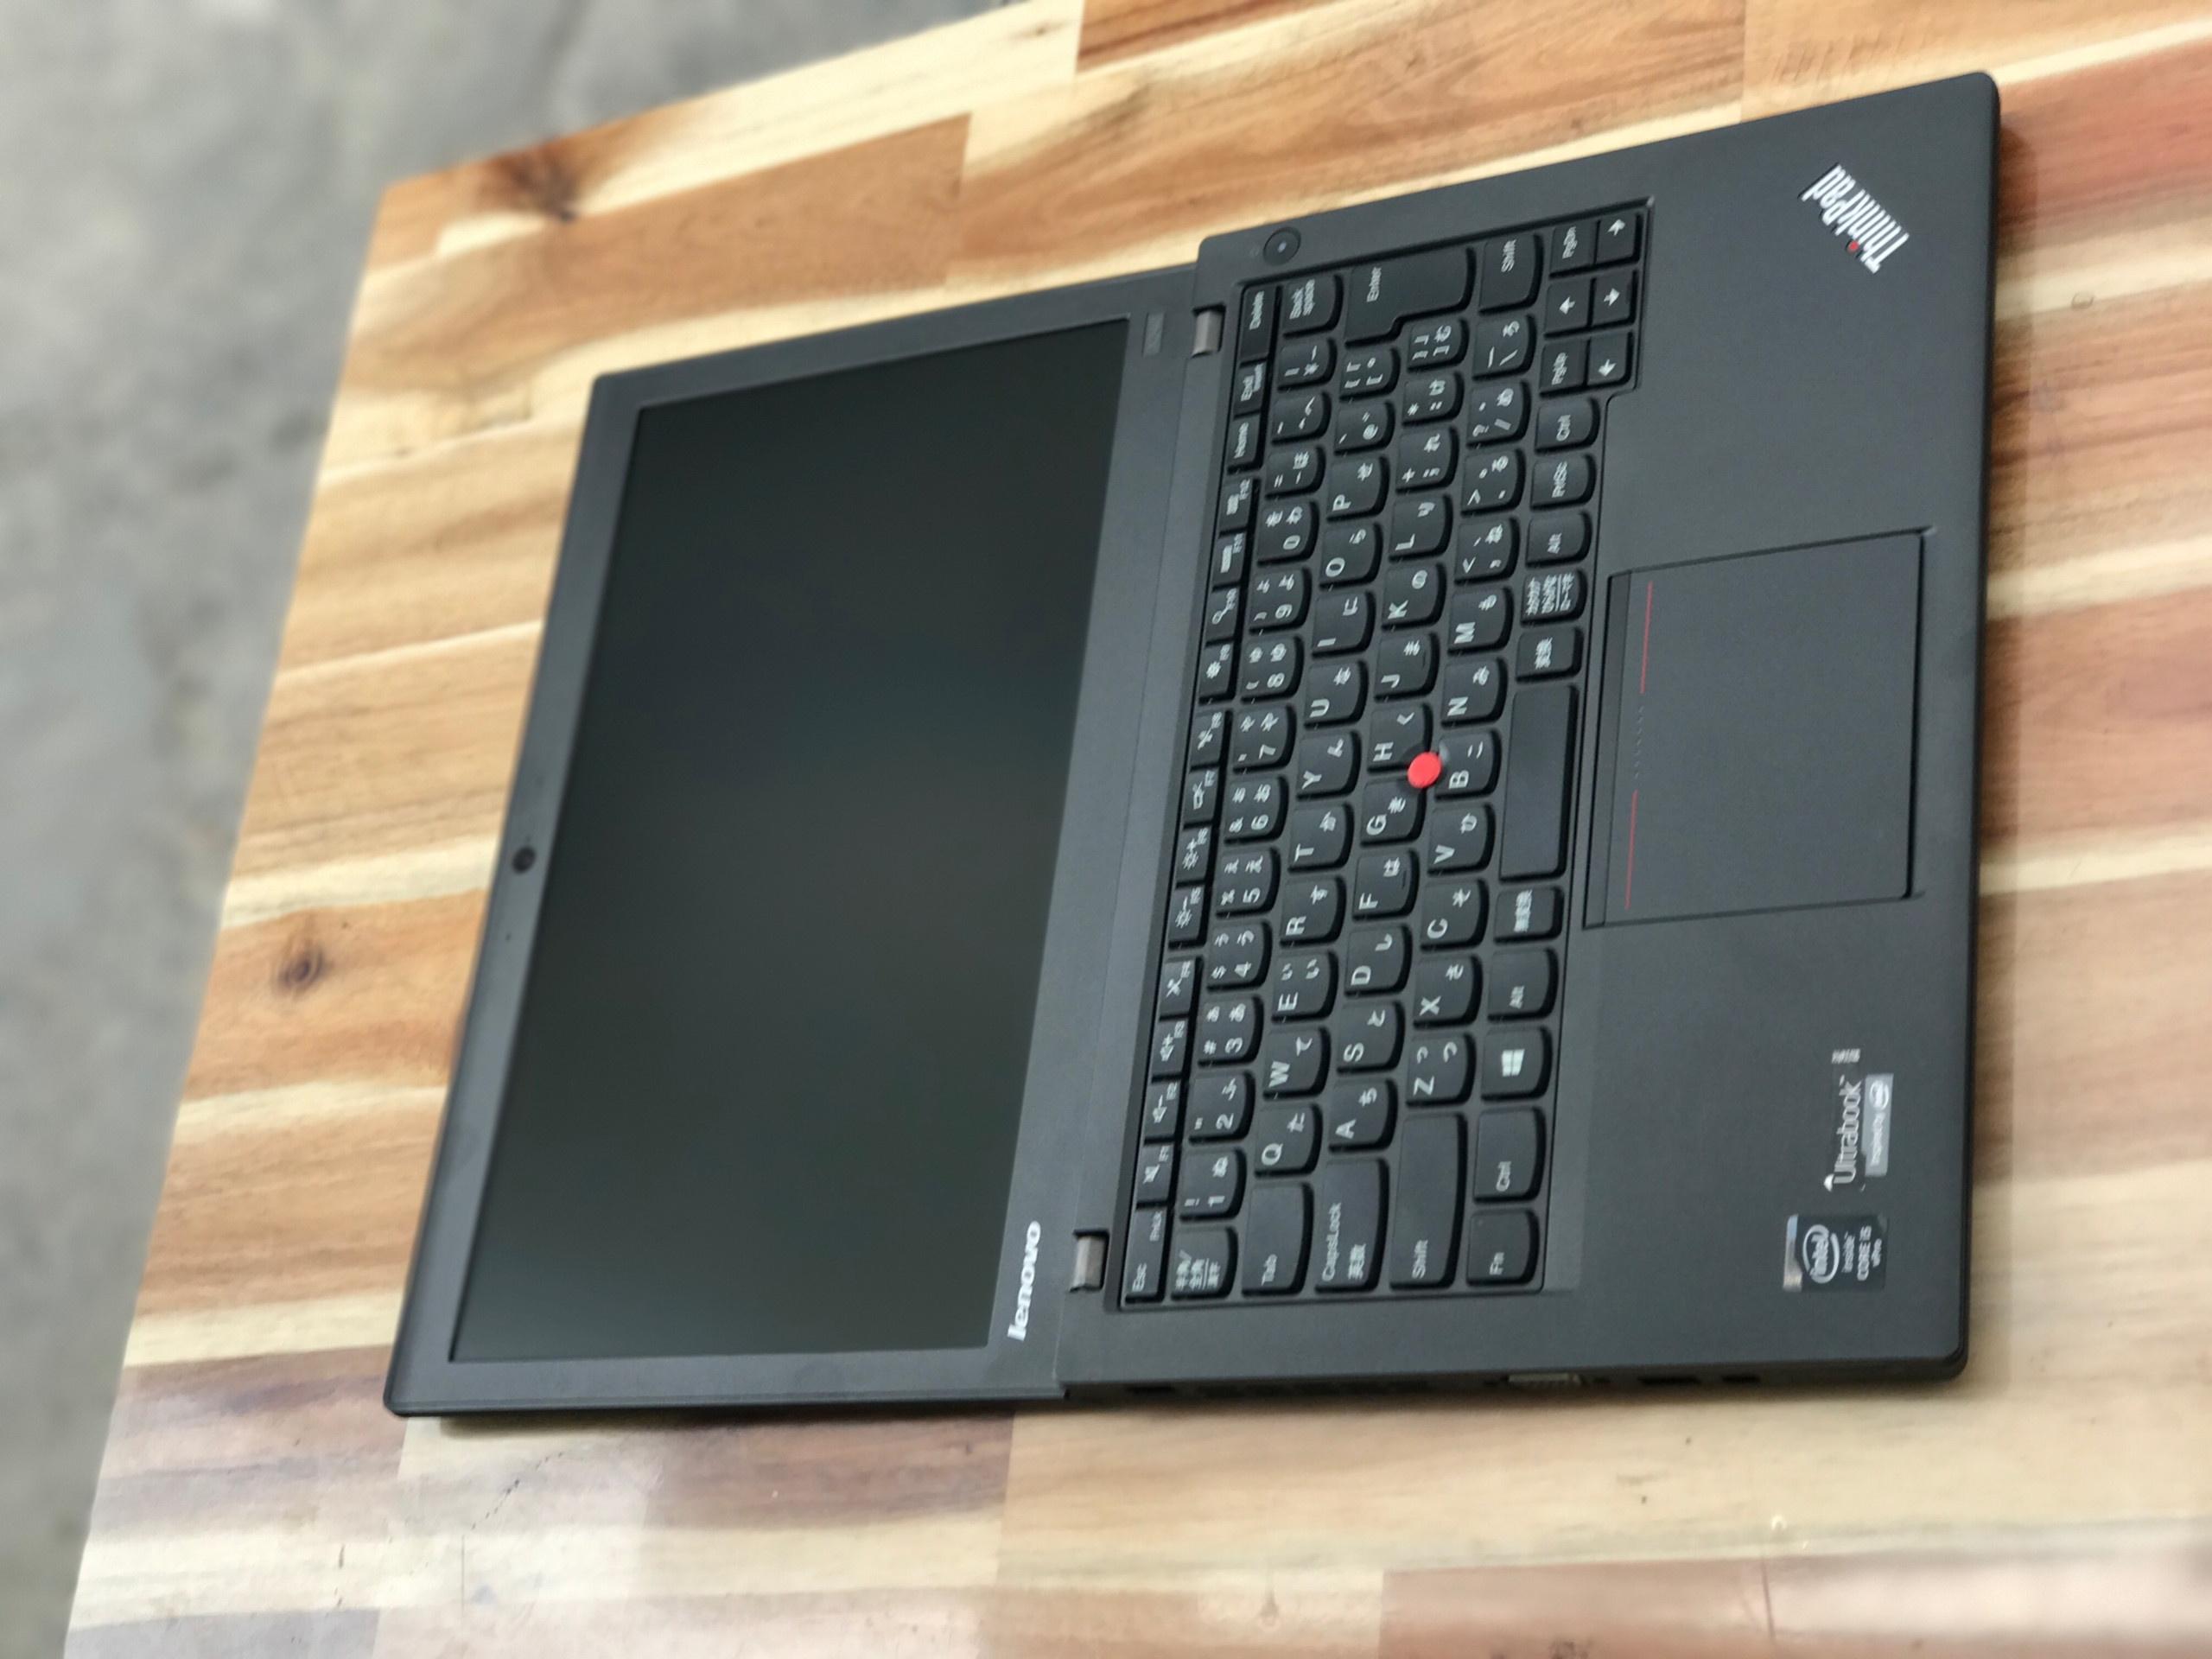 Laptop Lenovo Thinkpad X240/ Core i7 Haswell/ 4G/ SSD128 -500G/ 12/5in/ Win 10/ Giá rẻ2